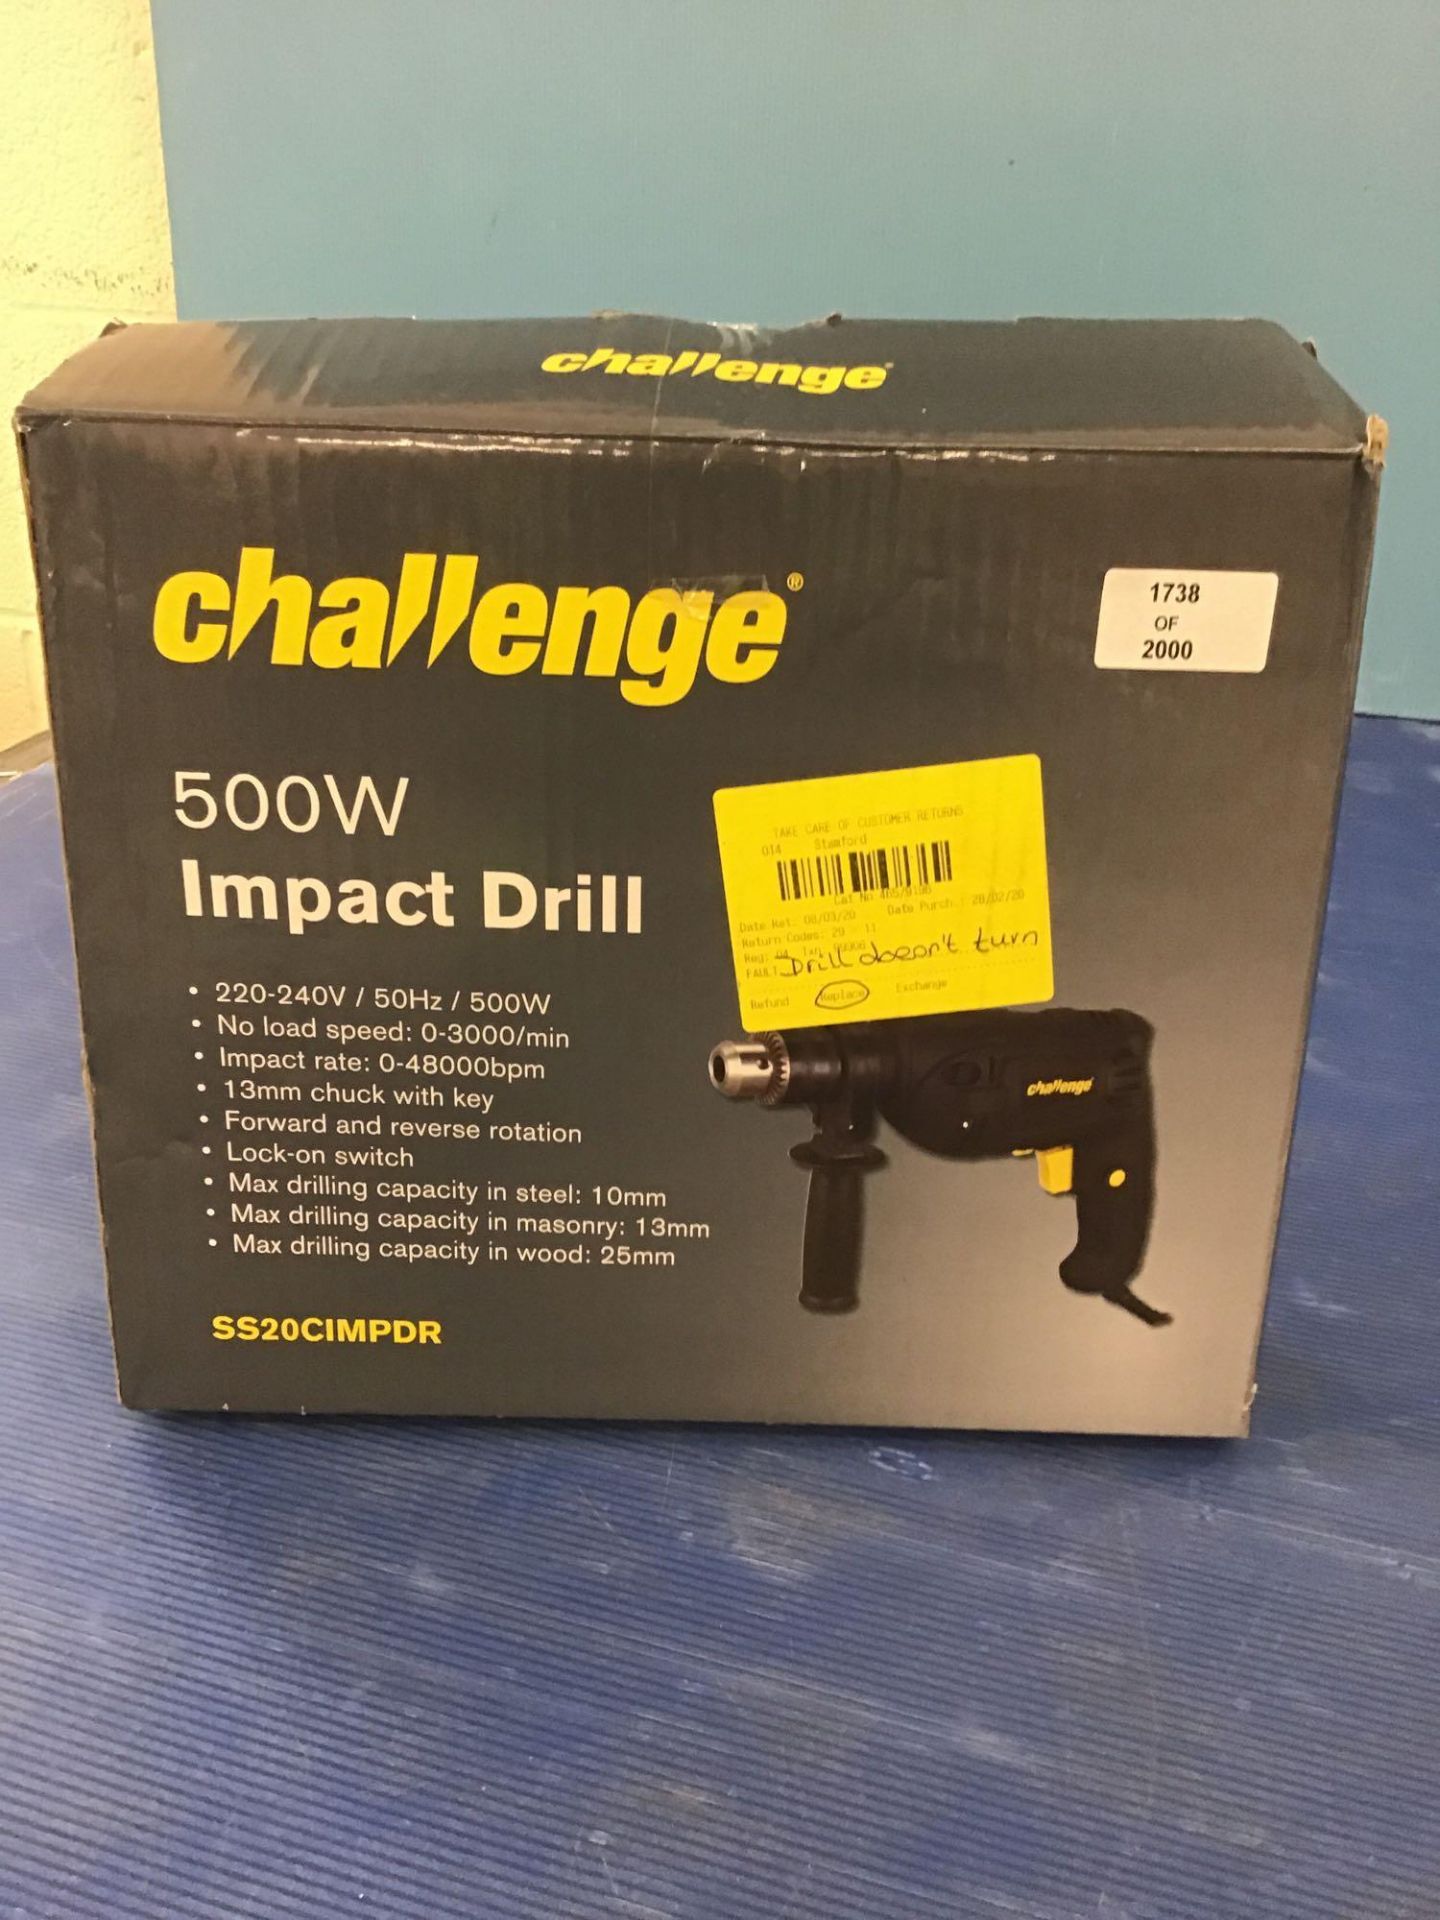 Challenge Corded Impact Drill - 500W, £15.00 RRP - Image 5 of 6